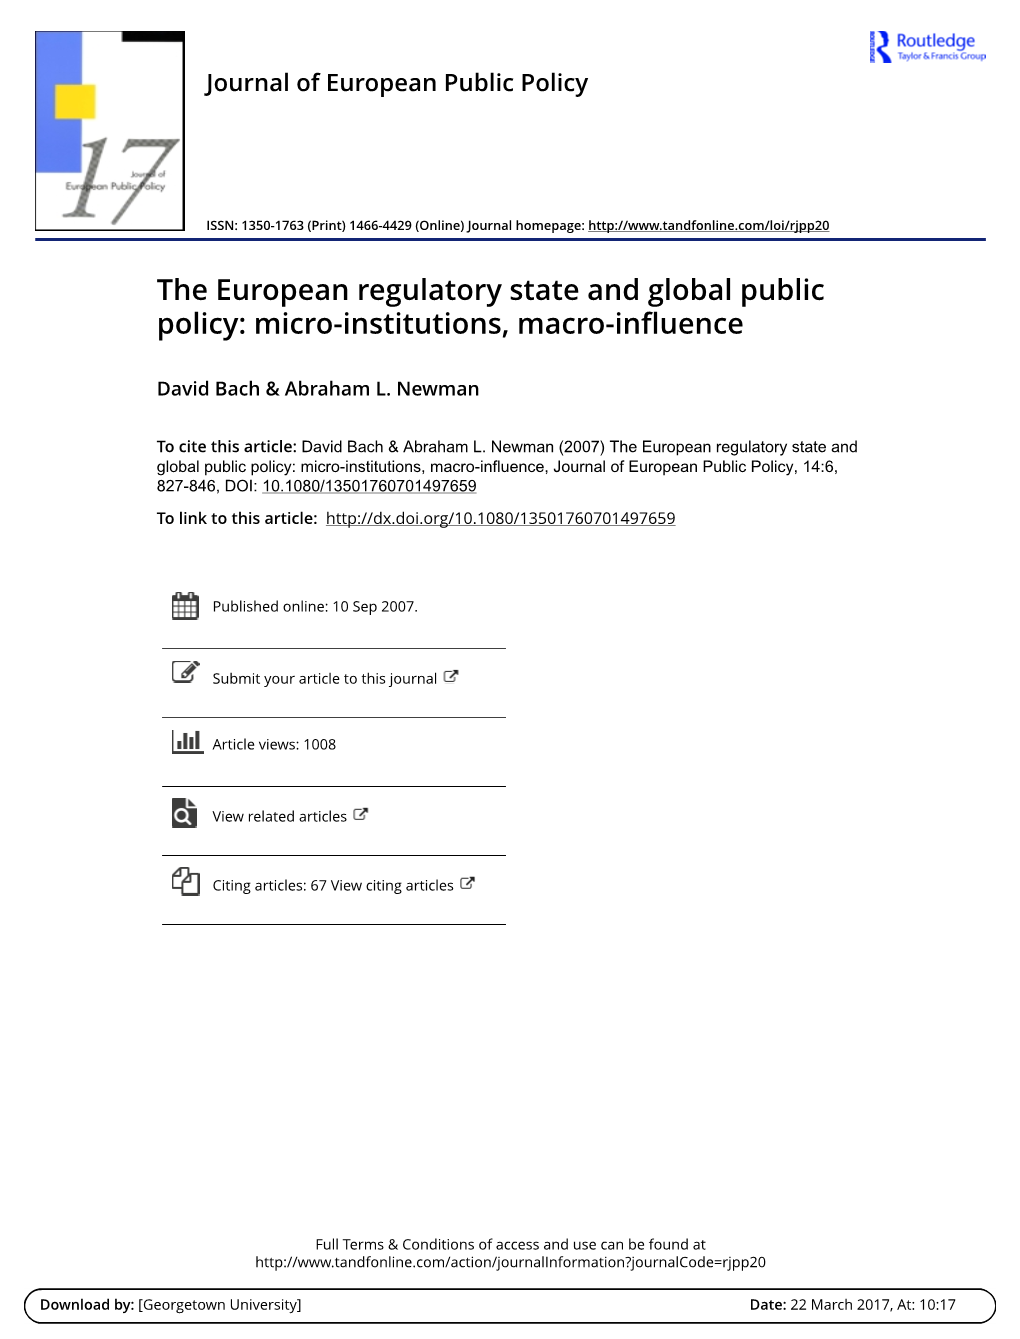 The European Regulatory State and Global Public Policy: Micro-Institutions, Macro-Influence